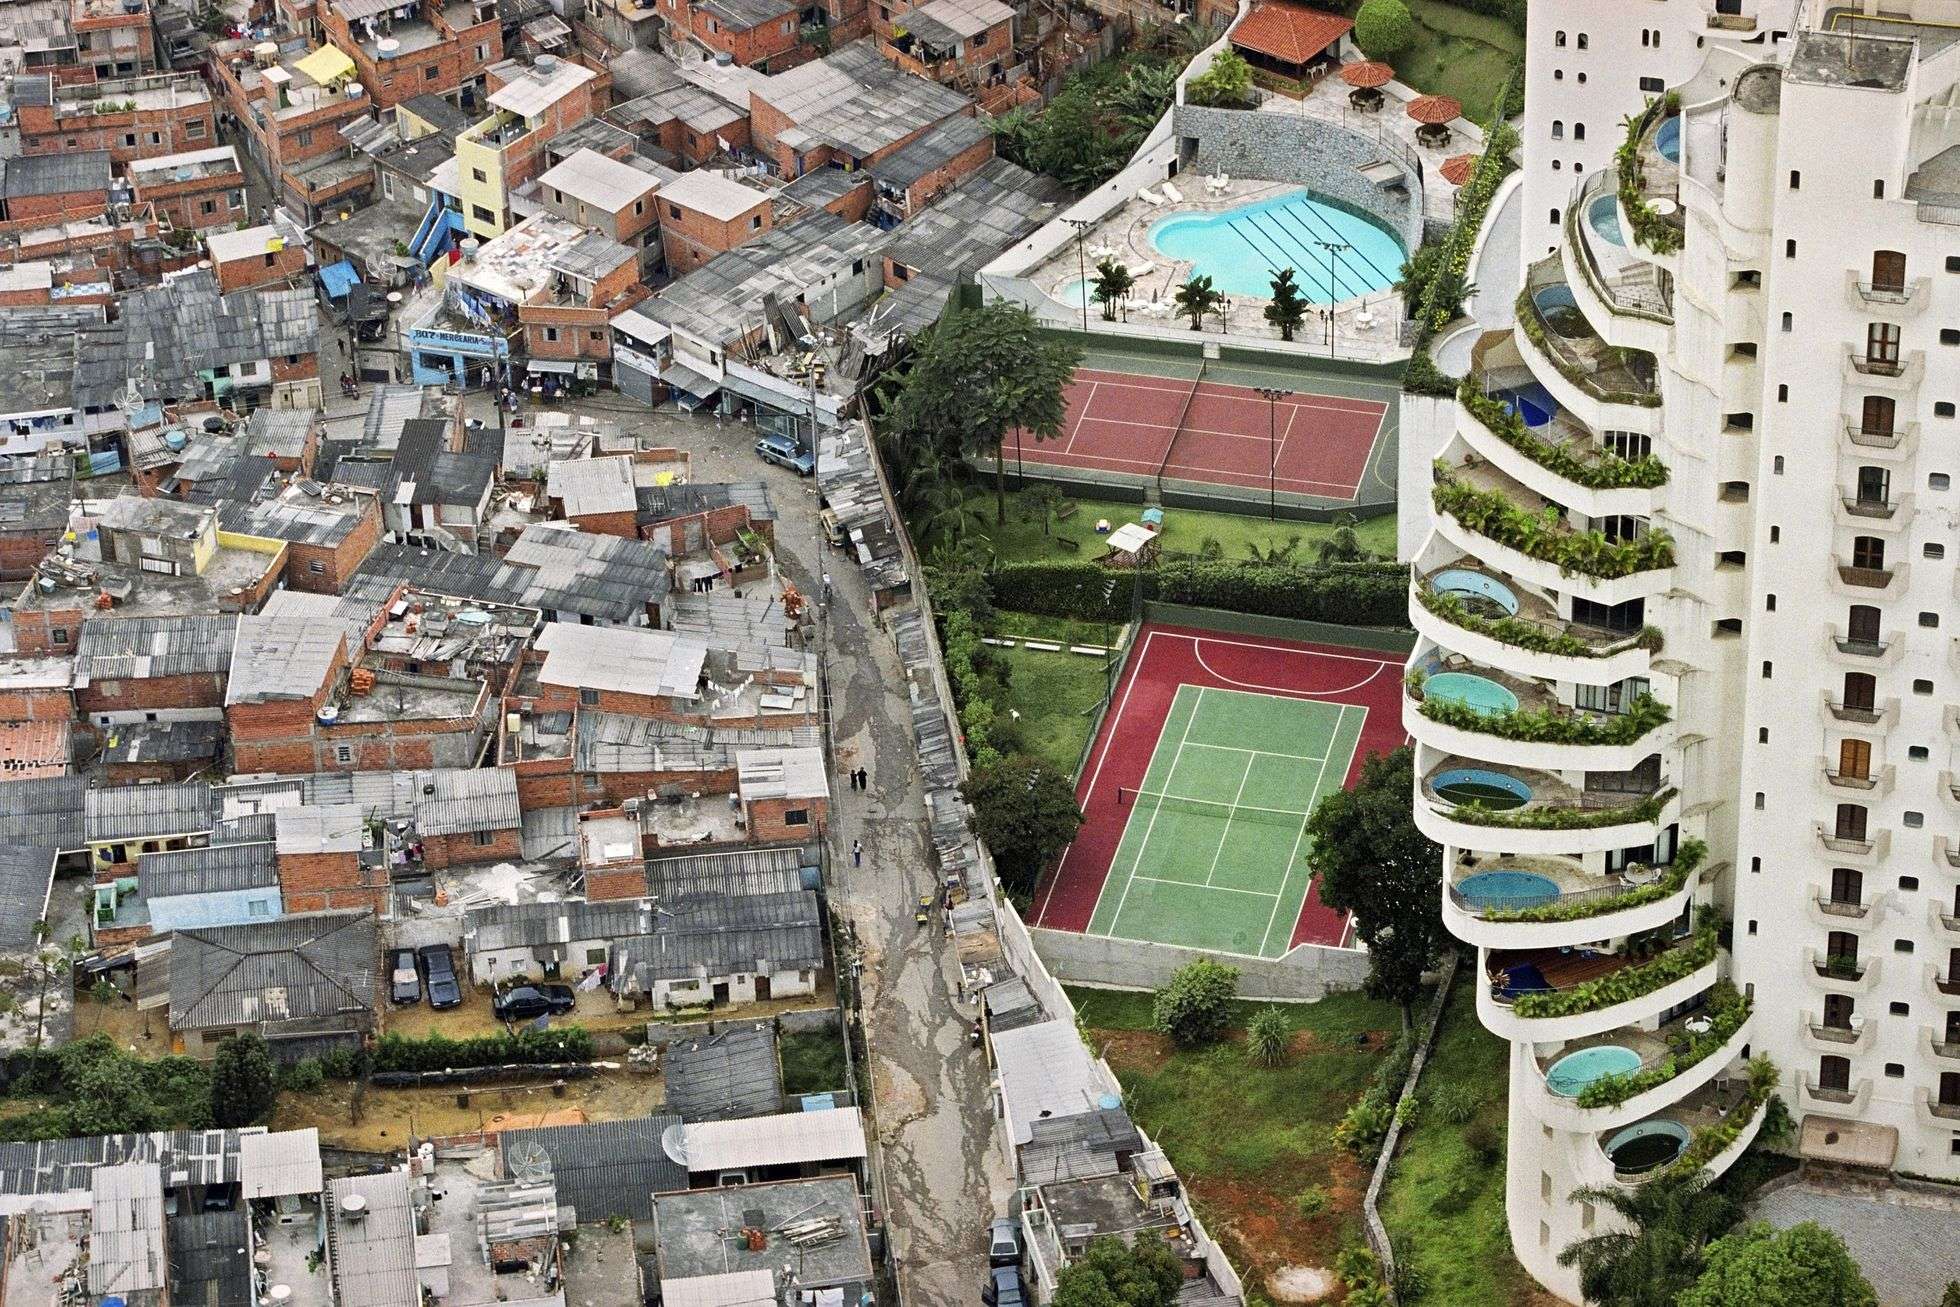 A favela next to a wealthy neighbourhood. Failure in Community sustainability initiatives leads to inequitable outcomes which make societies unsustainable.